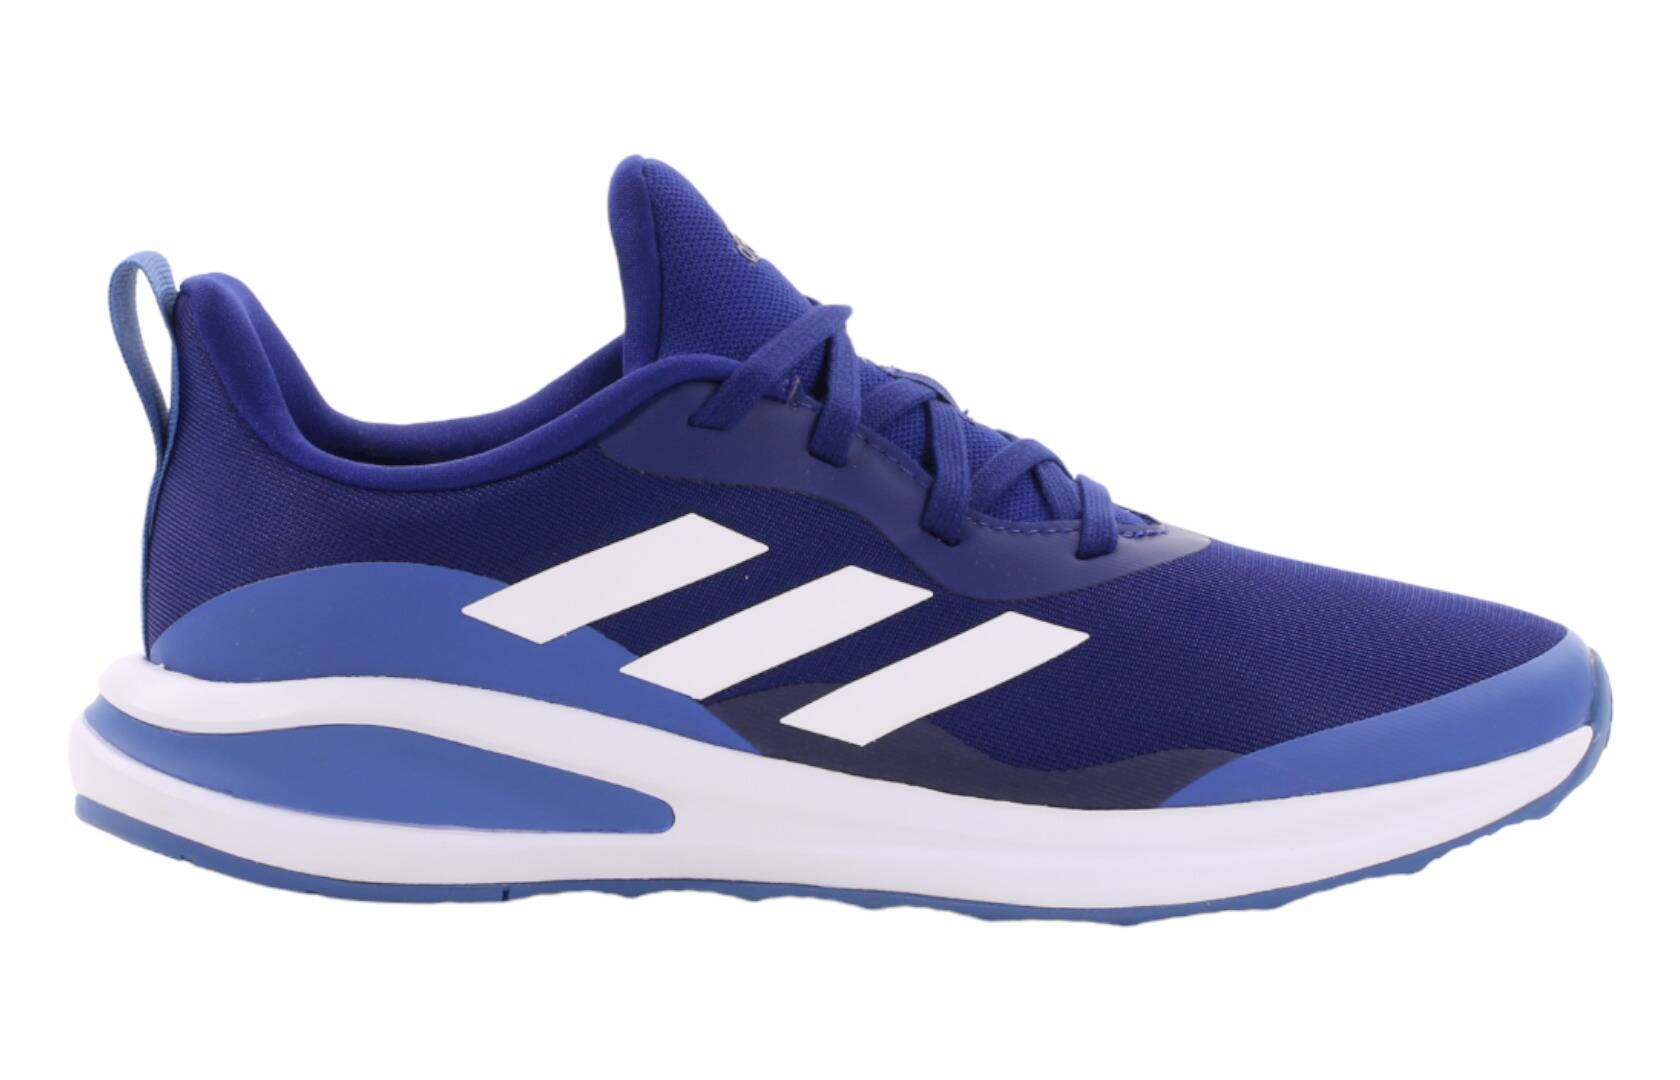 Adidas FortaRun K GY7596 youth shoes